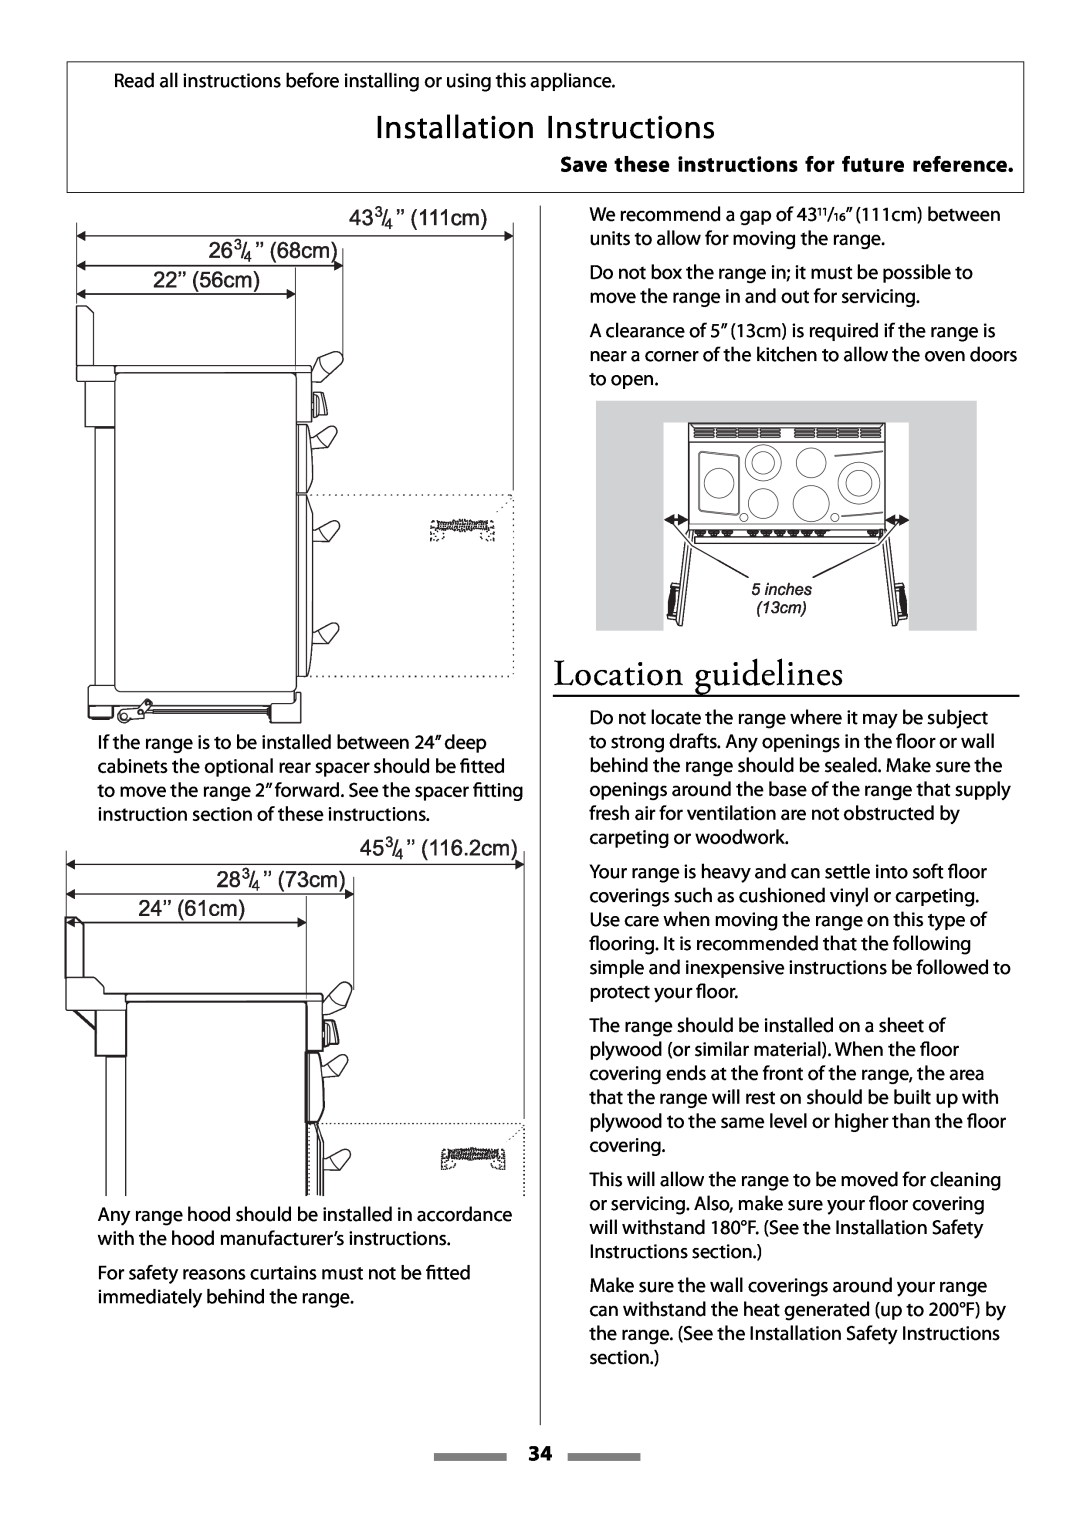 Aga Ranges Legacy 44 Location guidelines, Installation Instructions, Save these instructions for future reference 